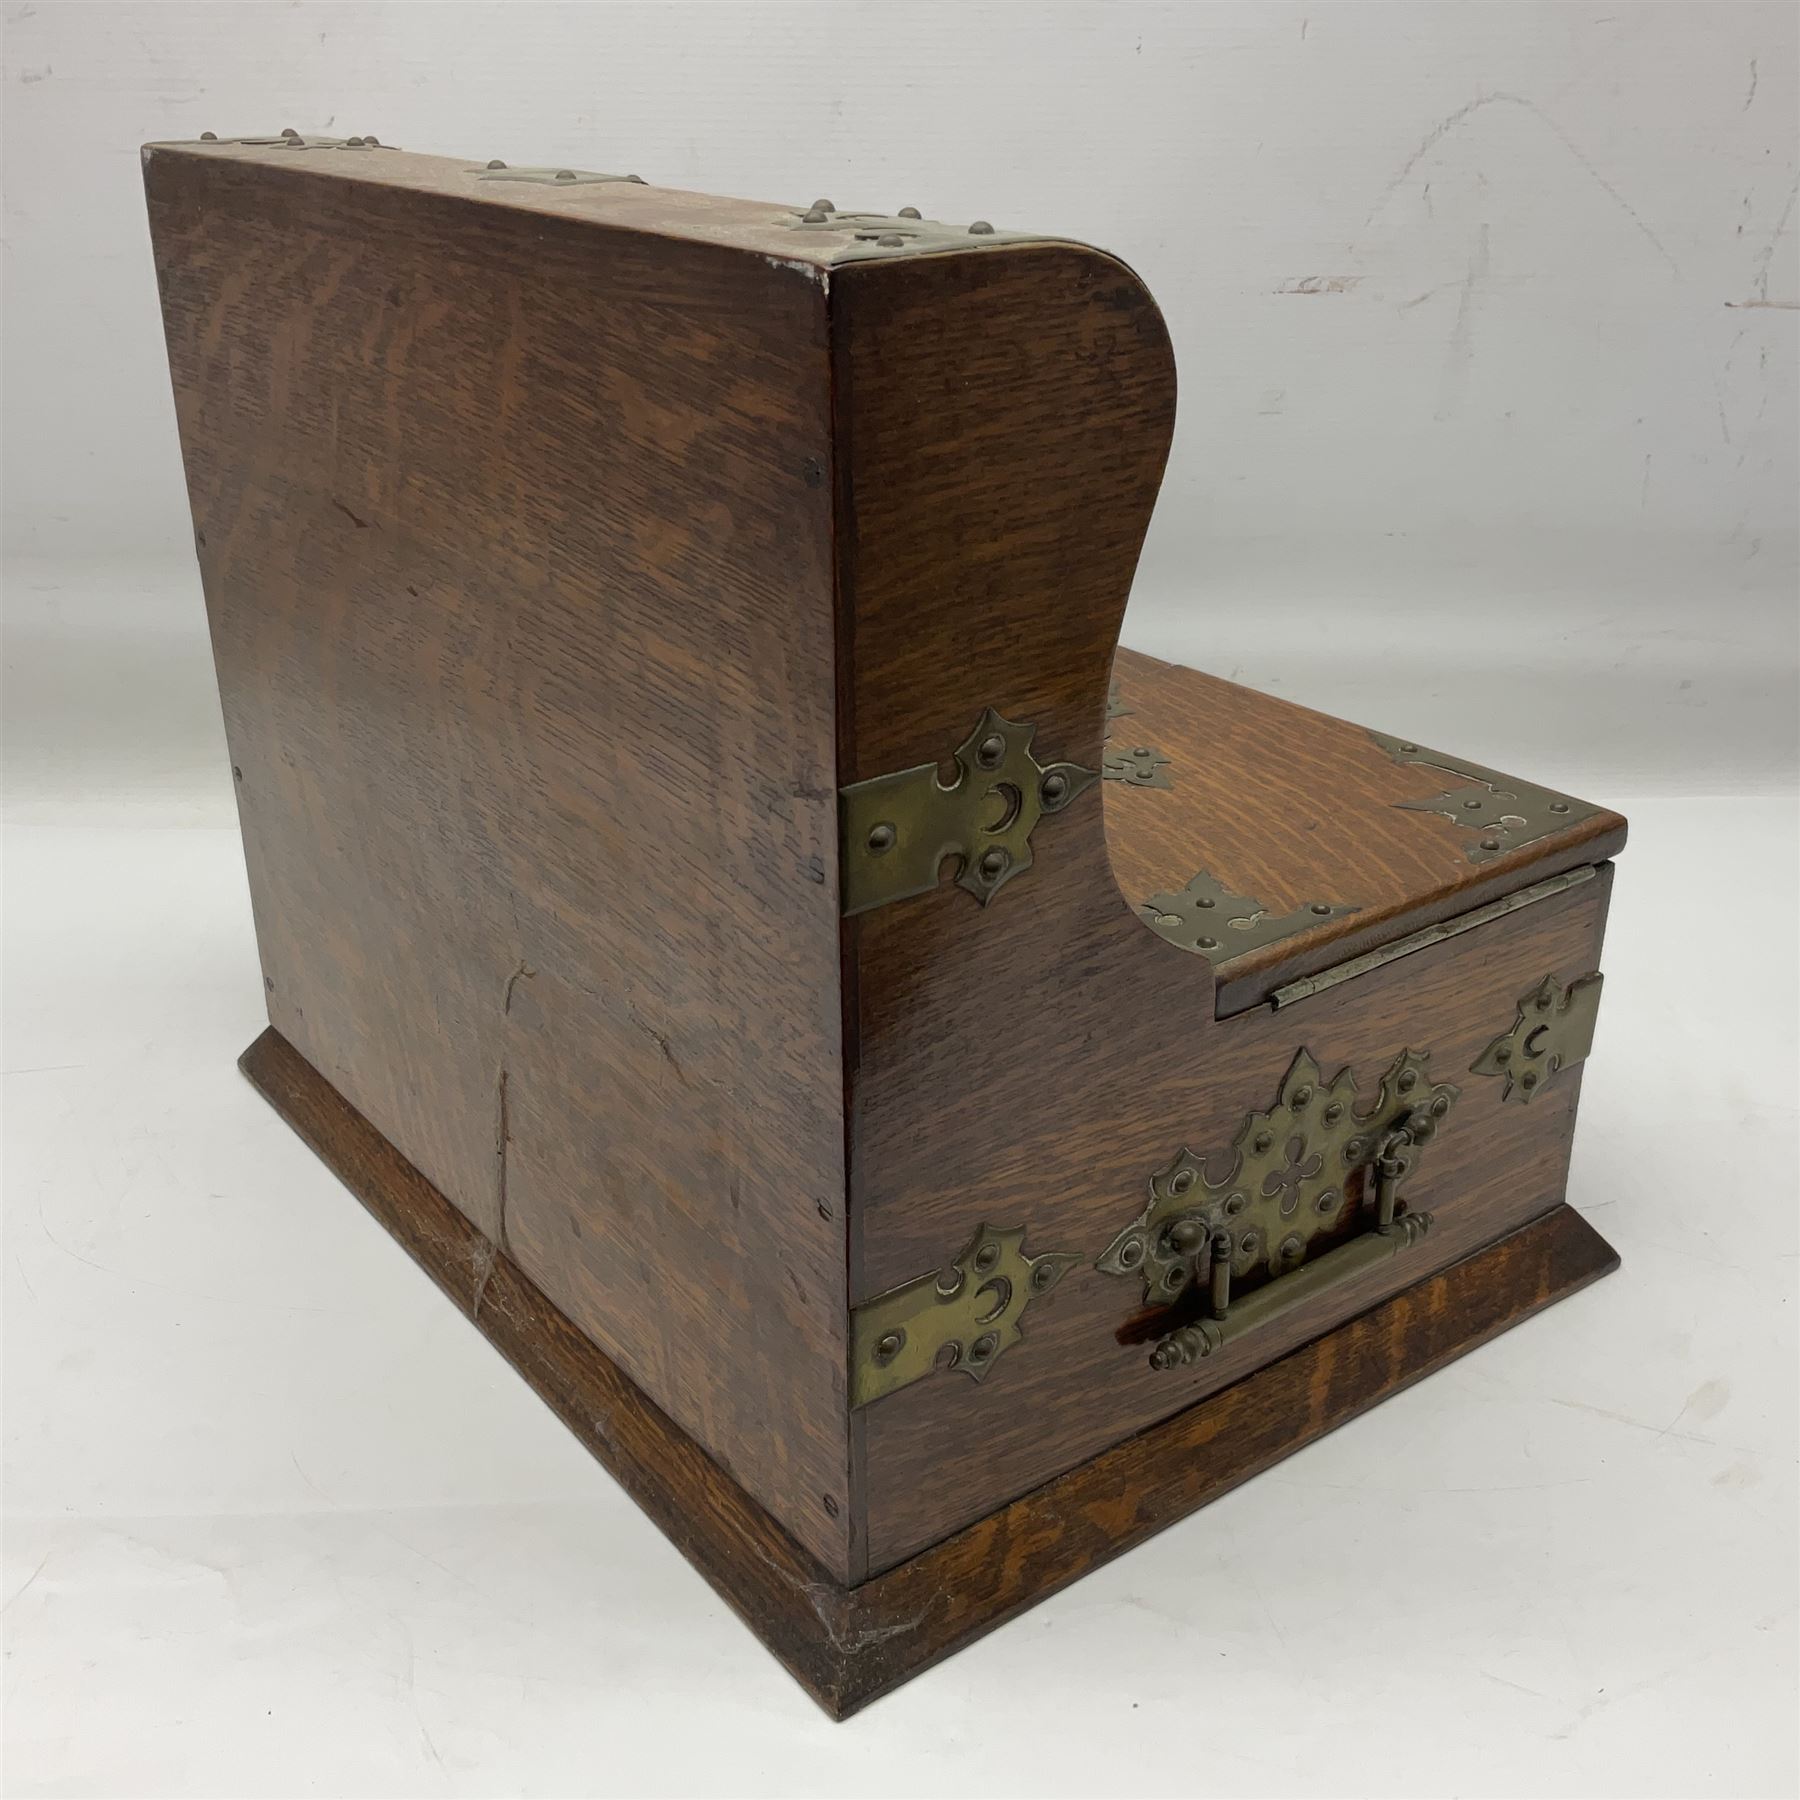 Edwardian oak tantalus with brass mounts and handles - Image 9 of 9